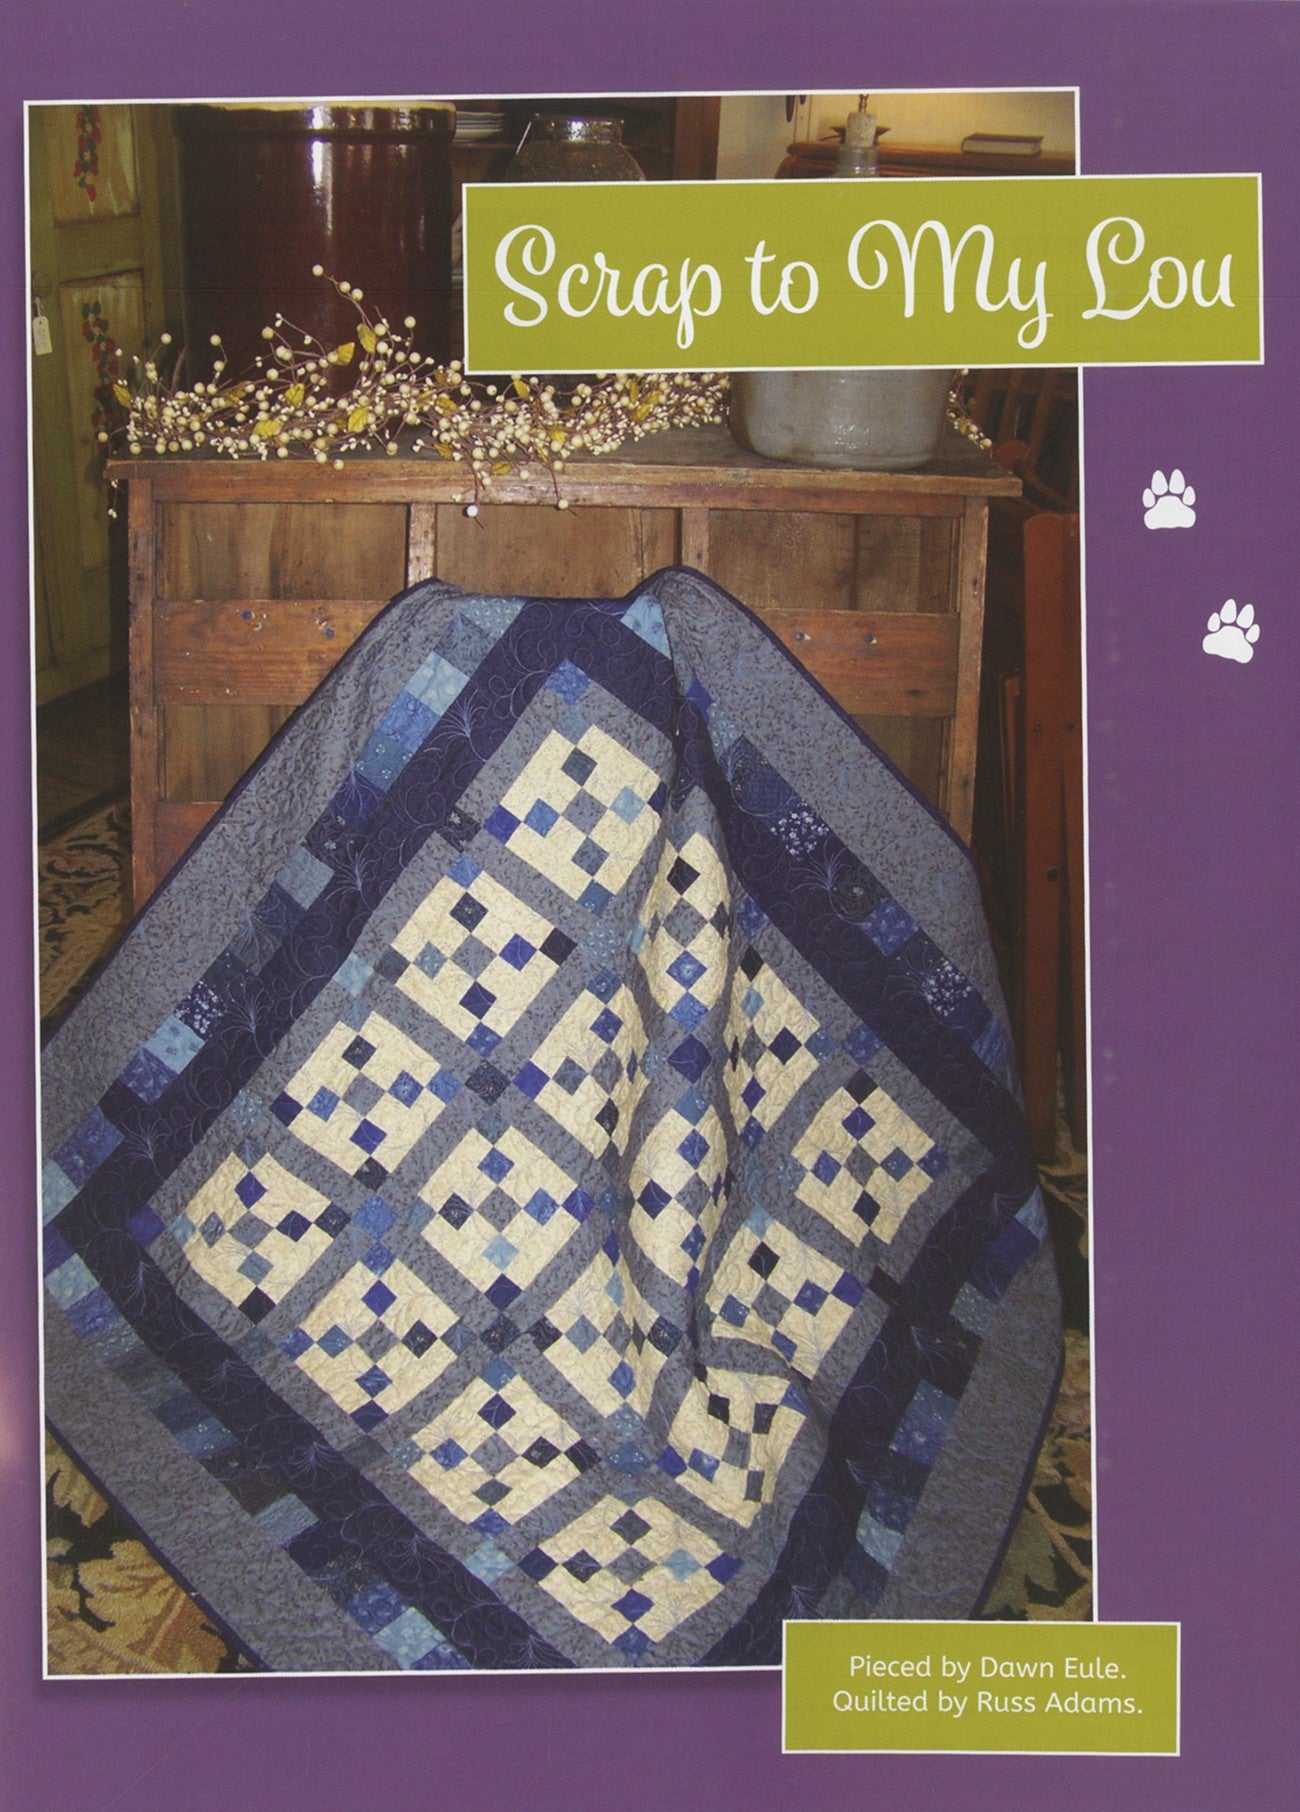 4-Patch Panache Quilt Pattern Book by Deb Heatherly of Deb's Cats N Quilts